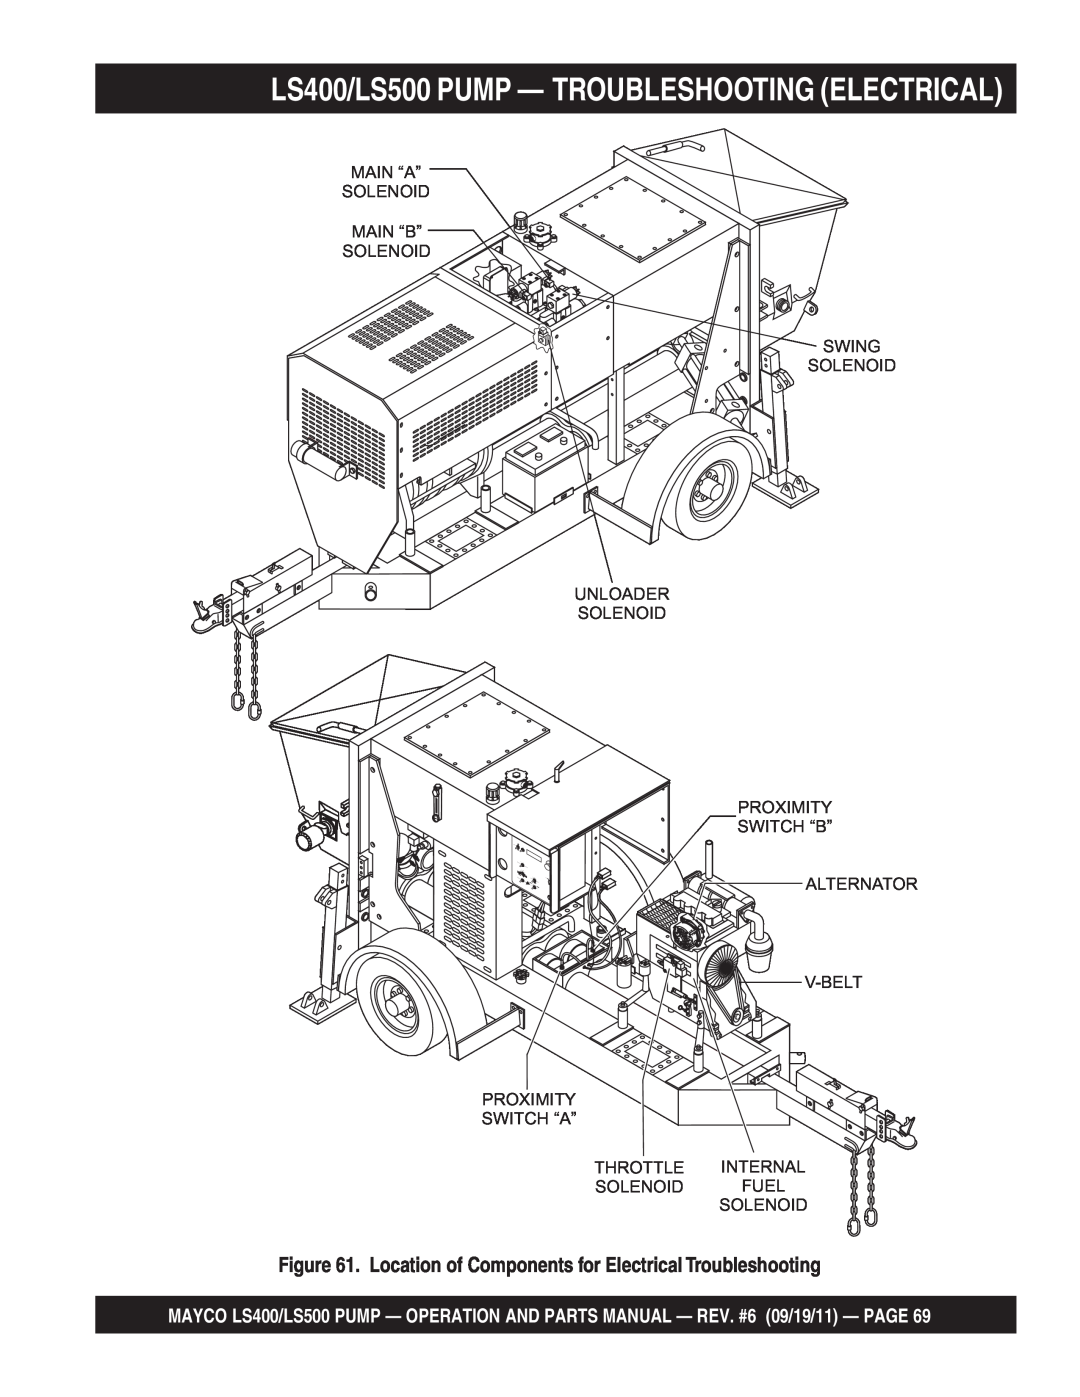 Multiquip manual Location of Components for Electrical Troubleshooting, LS400/LS500 PUMP - TROUBLESHOOTING ELECTRICAL 